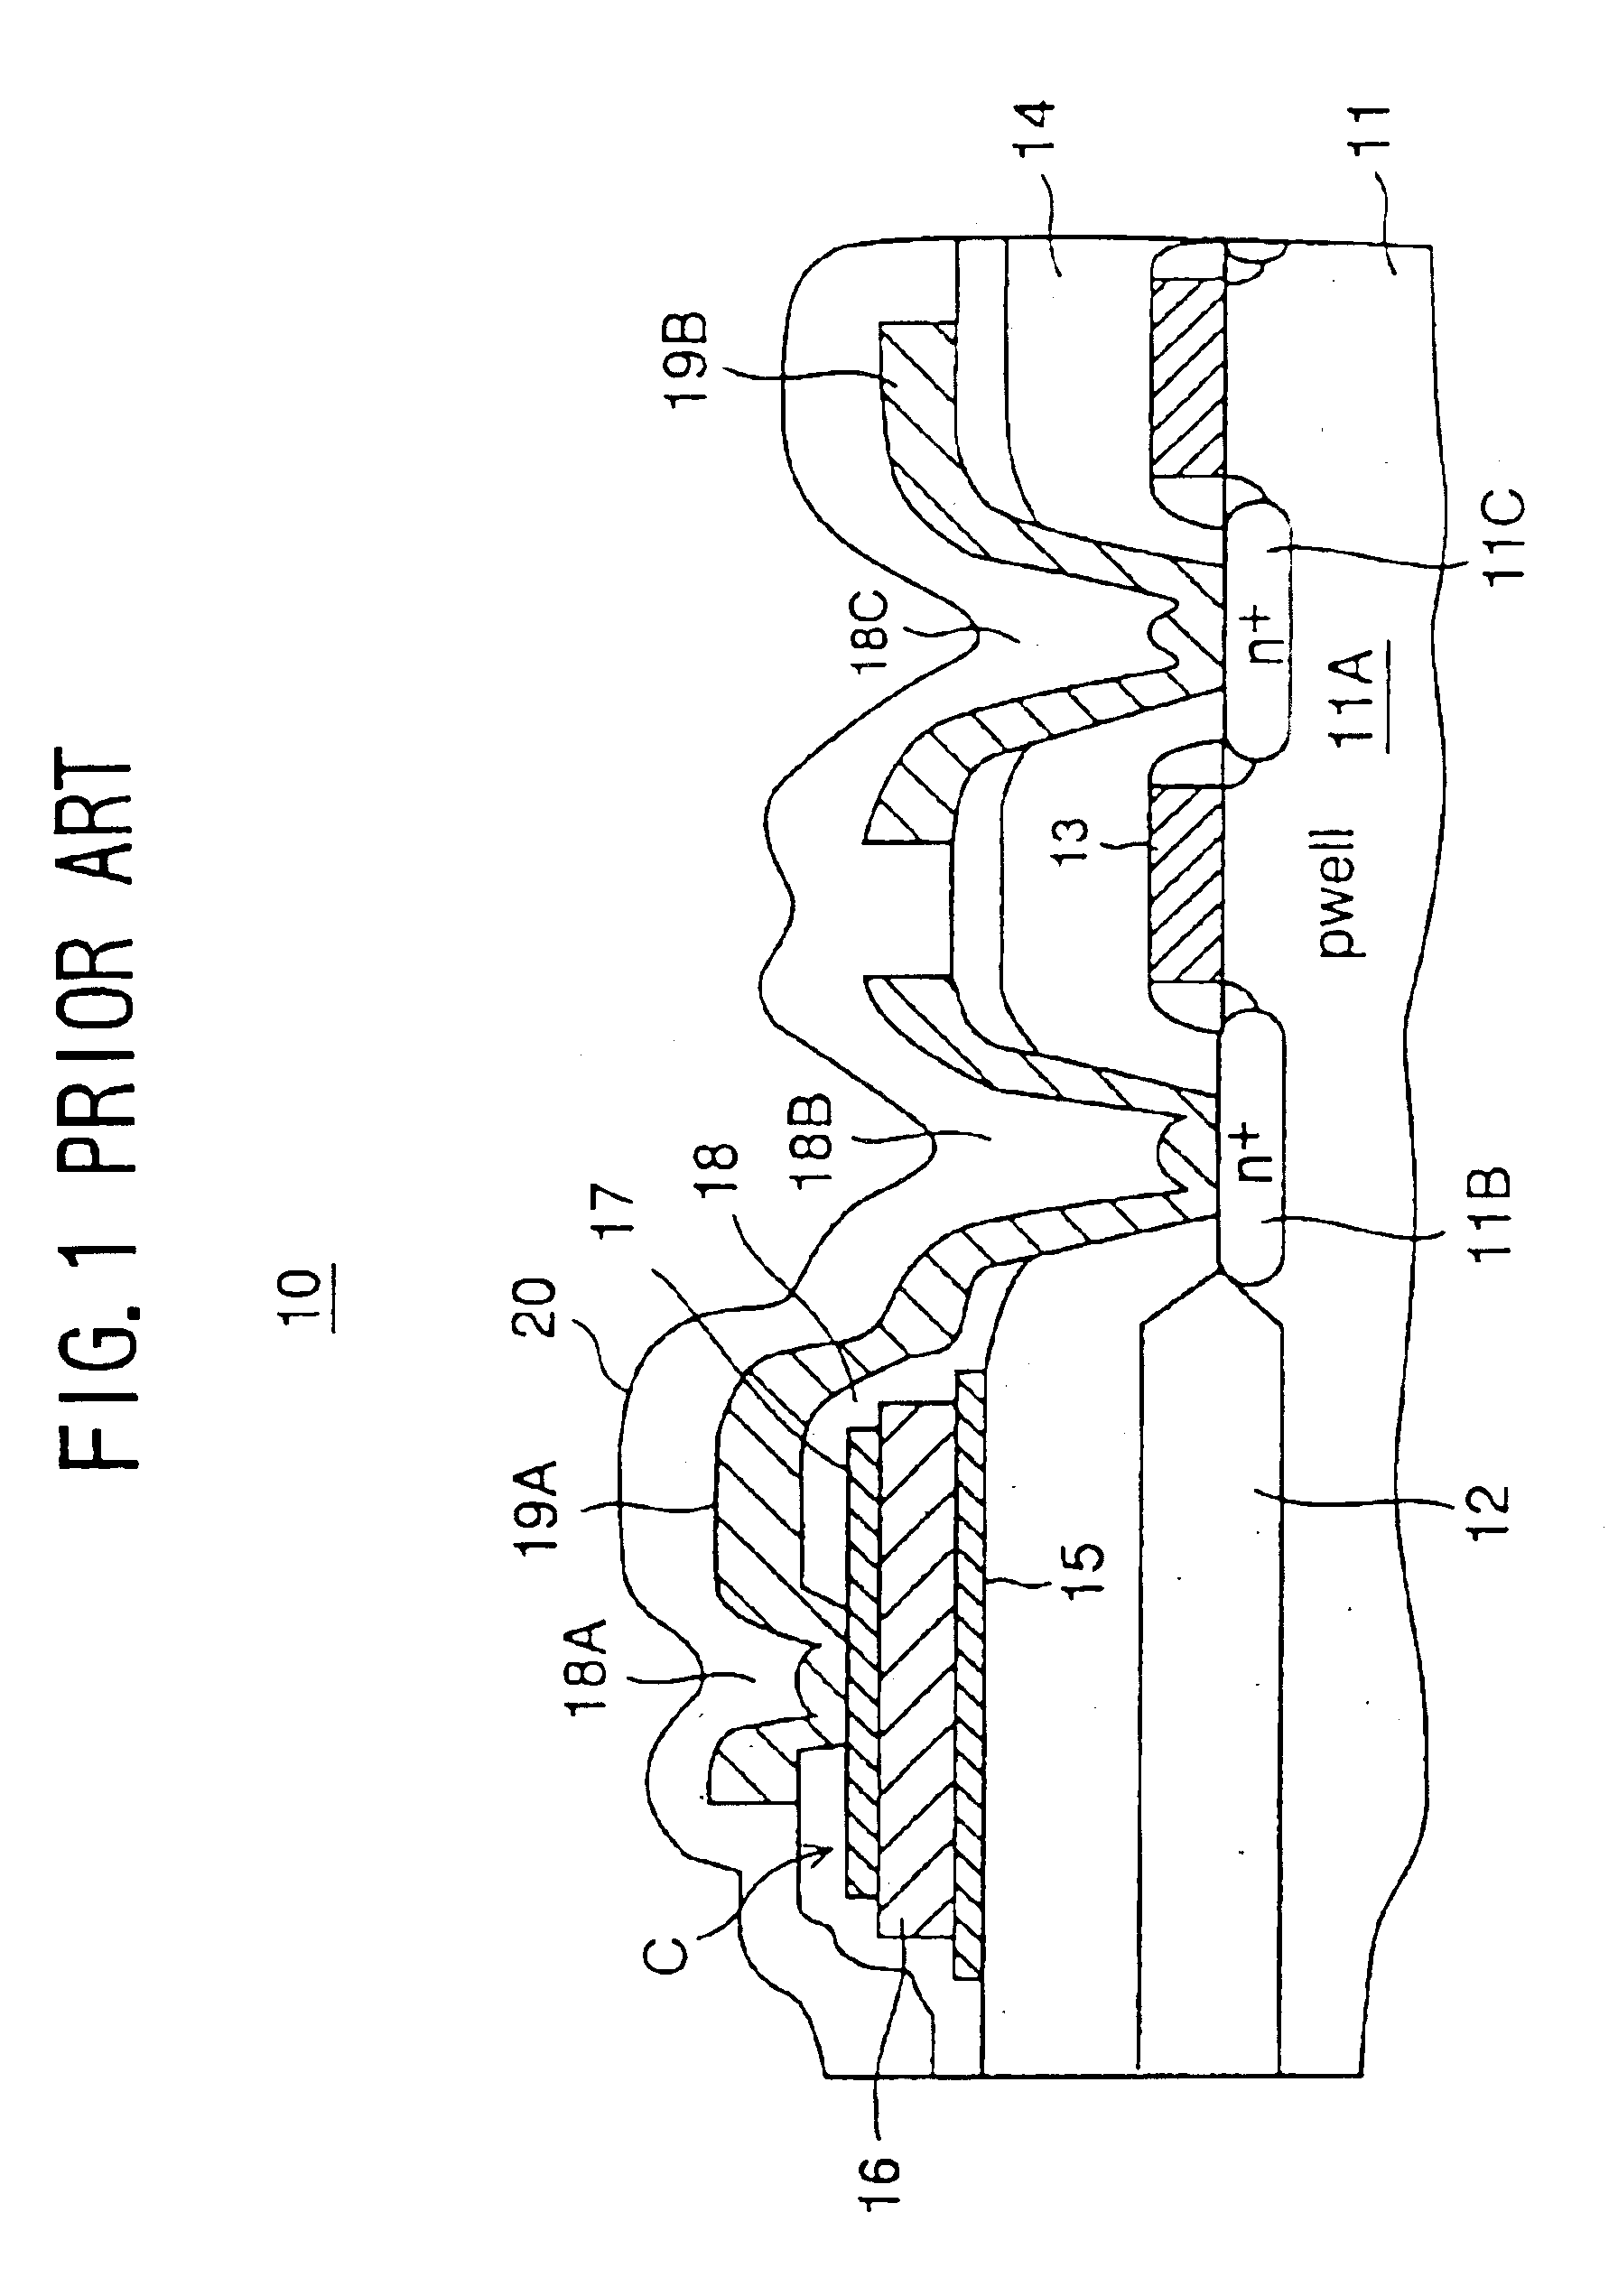 Ferroelectric capacitor and a semiconductor device